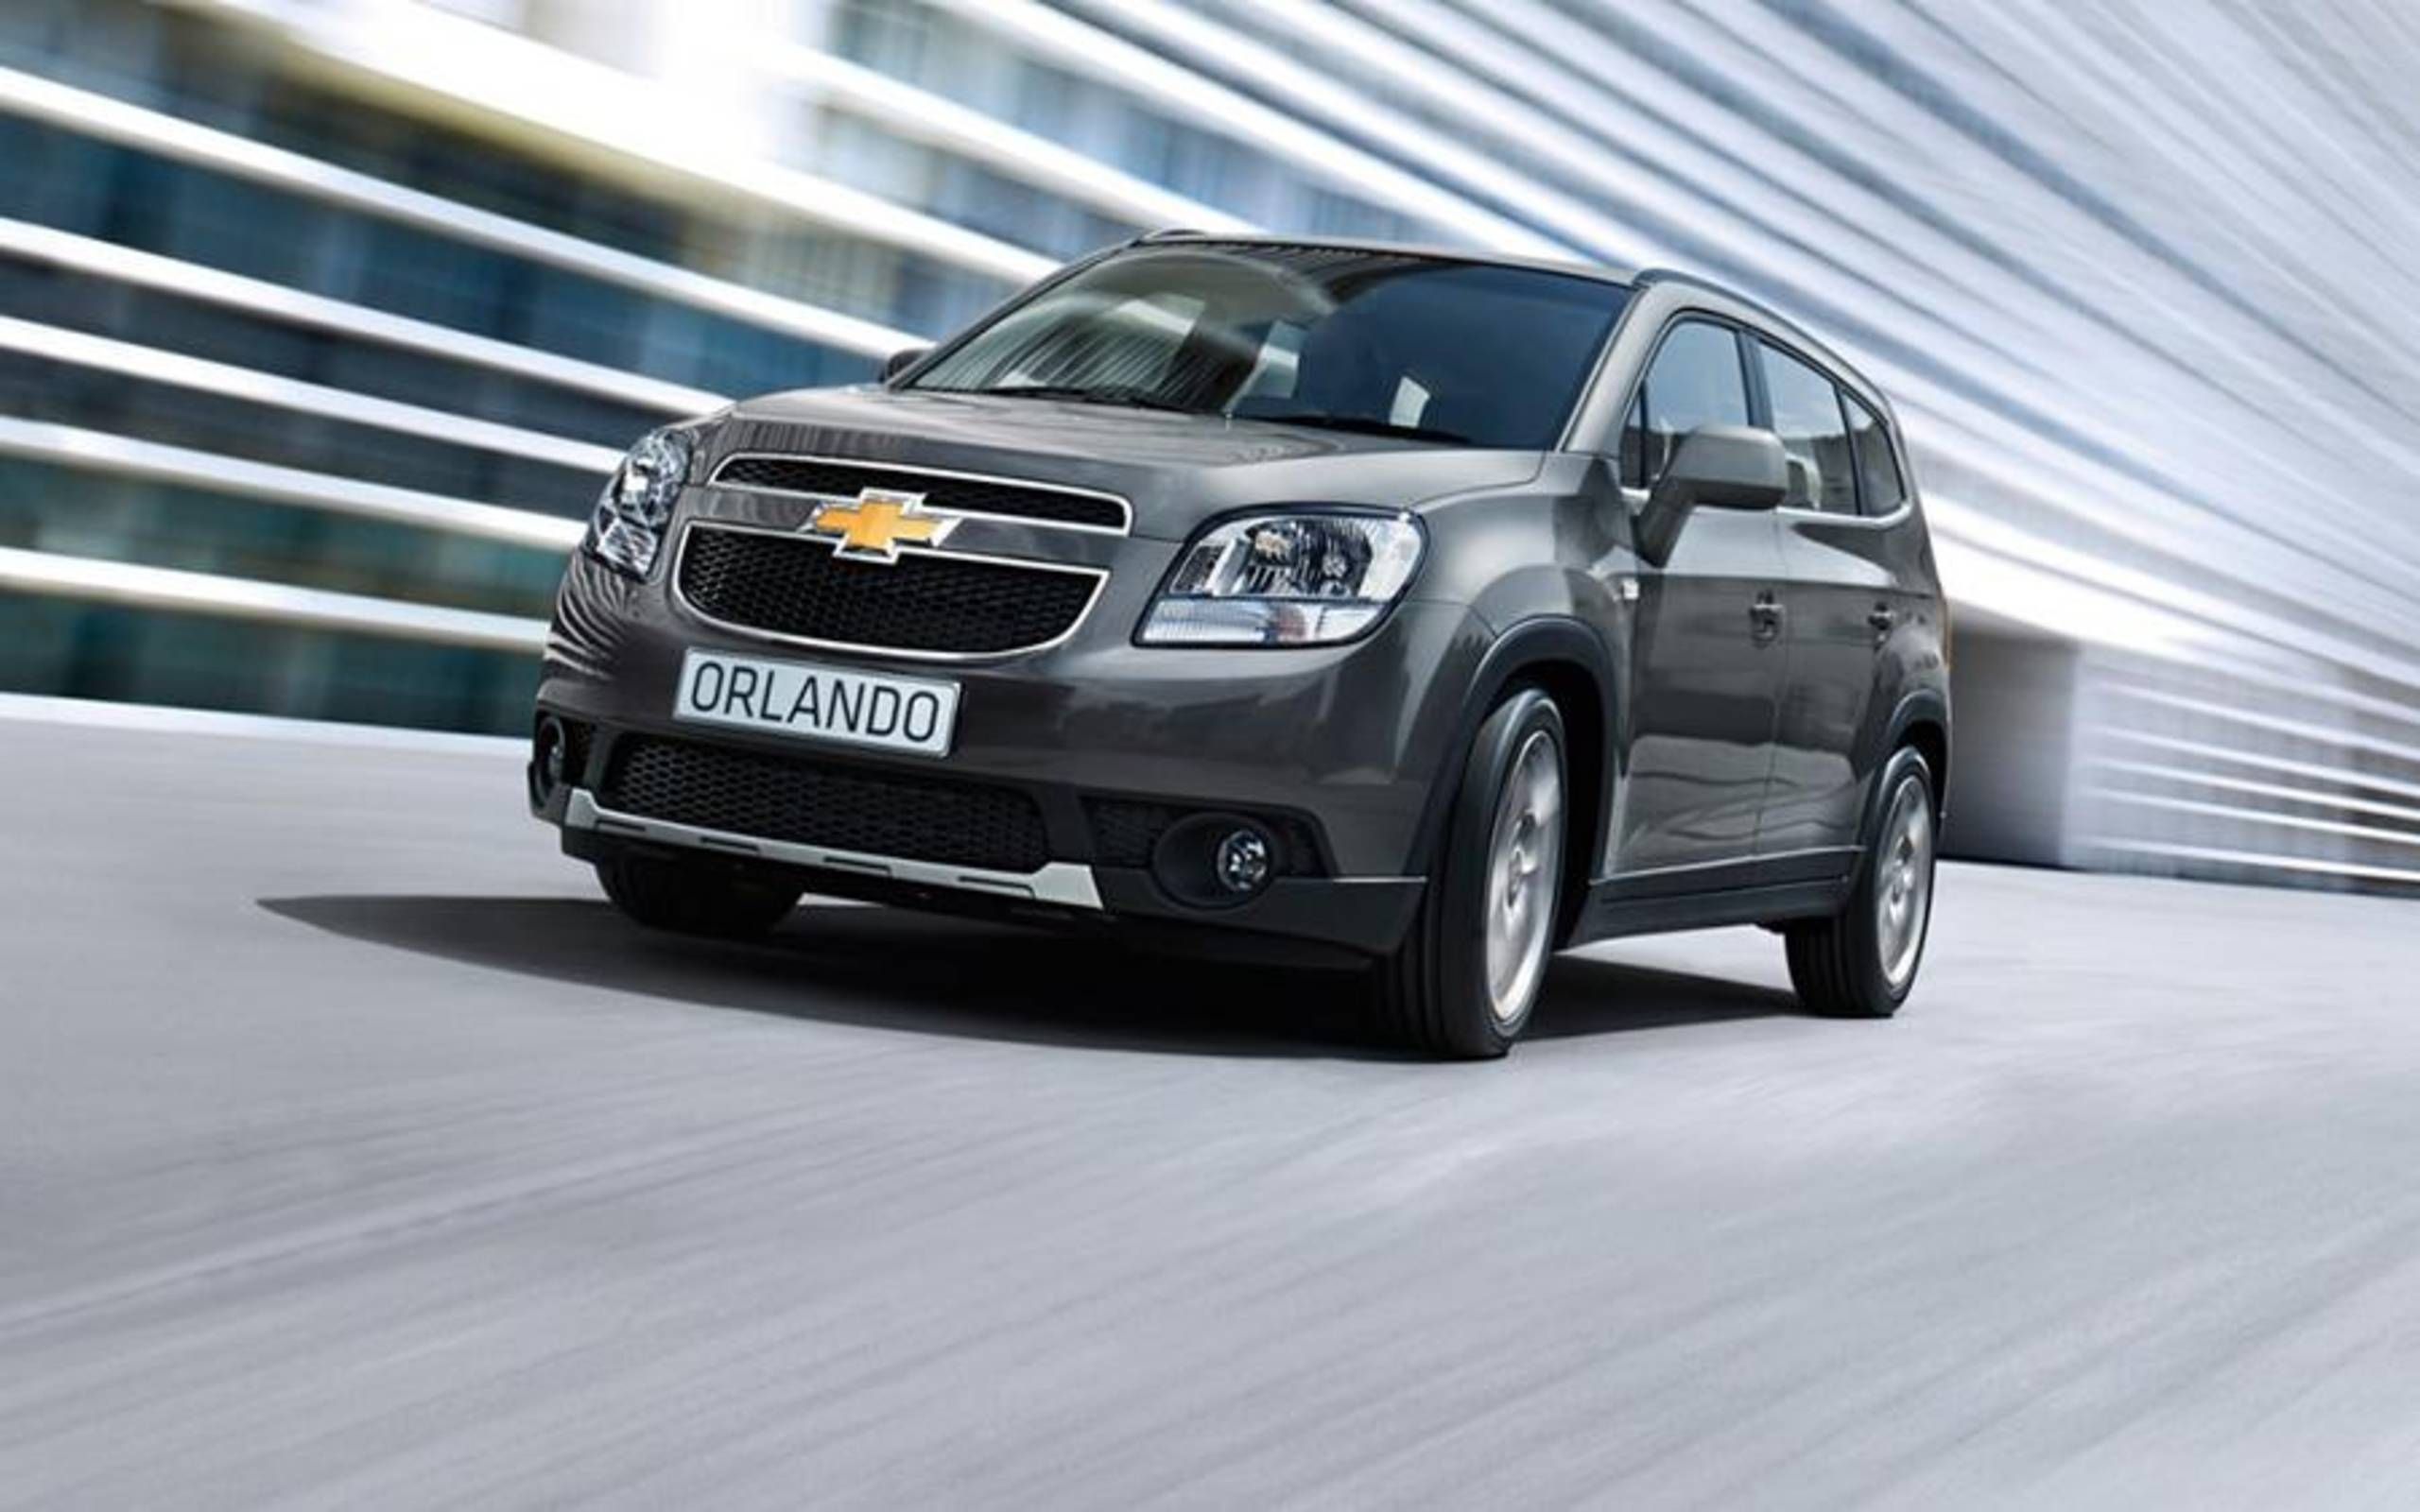 Would you buy a Chevrolet Orlando?